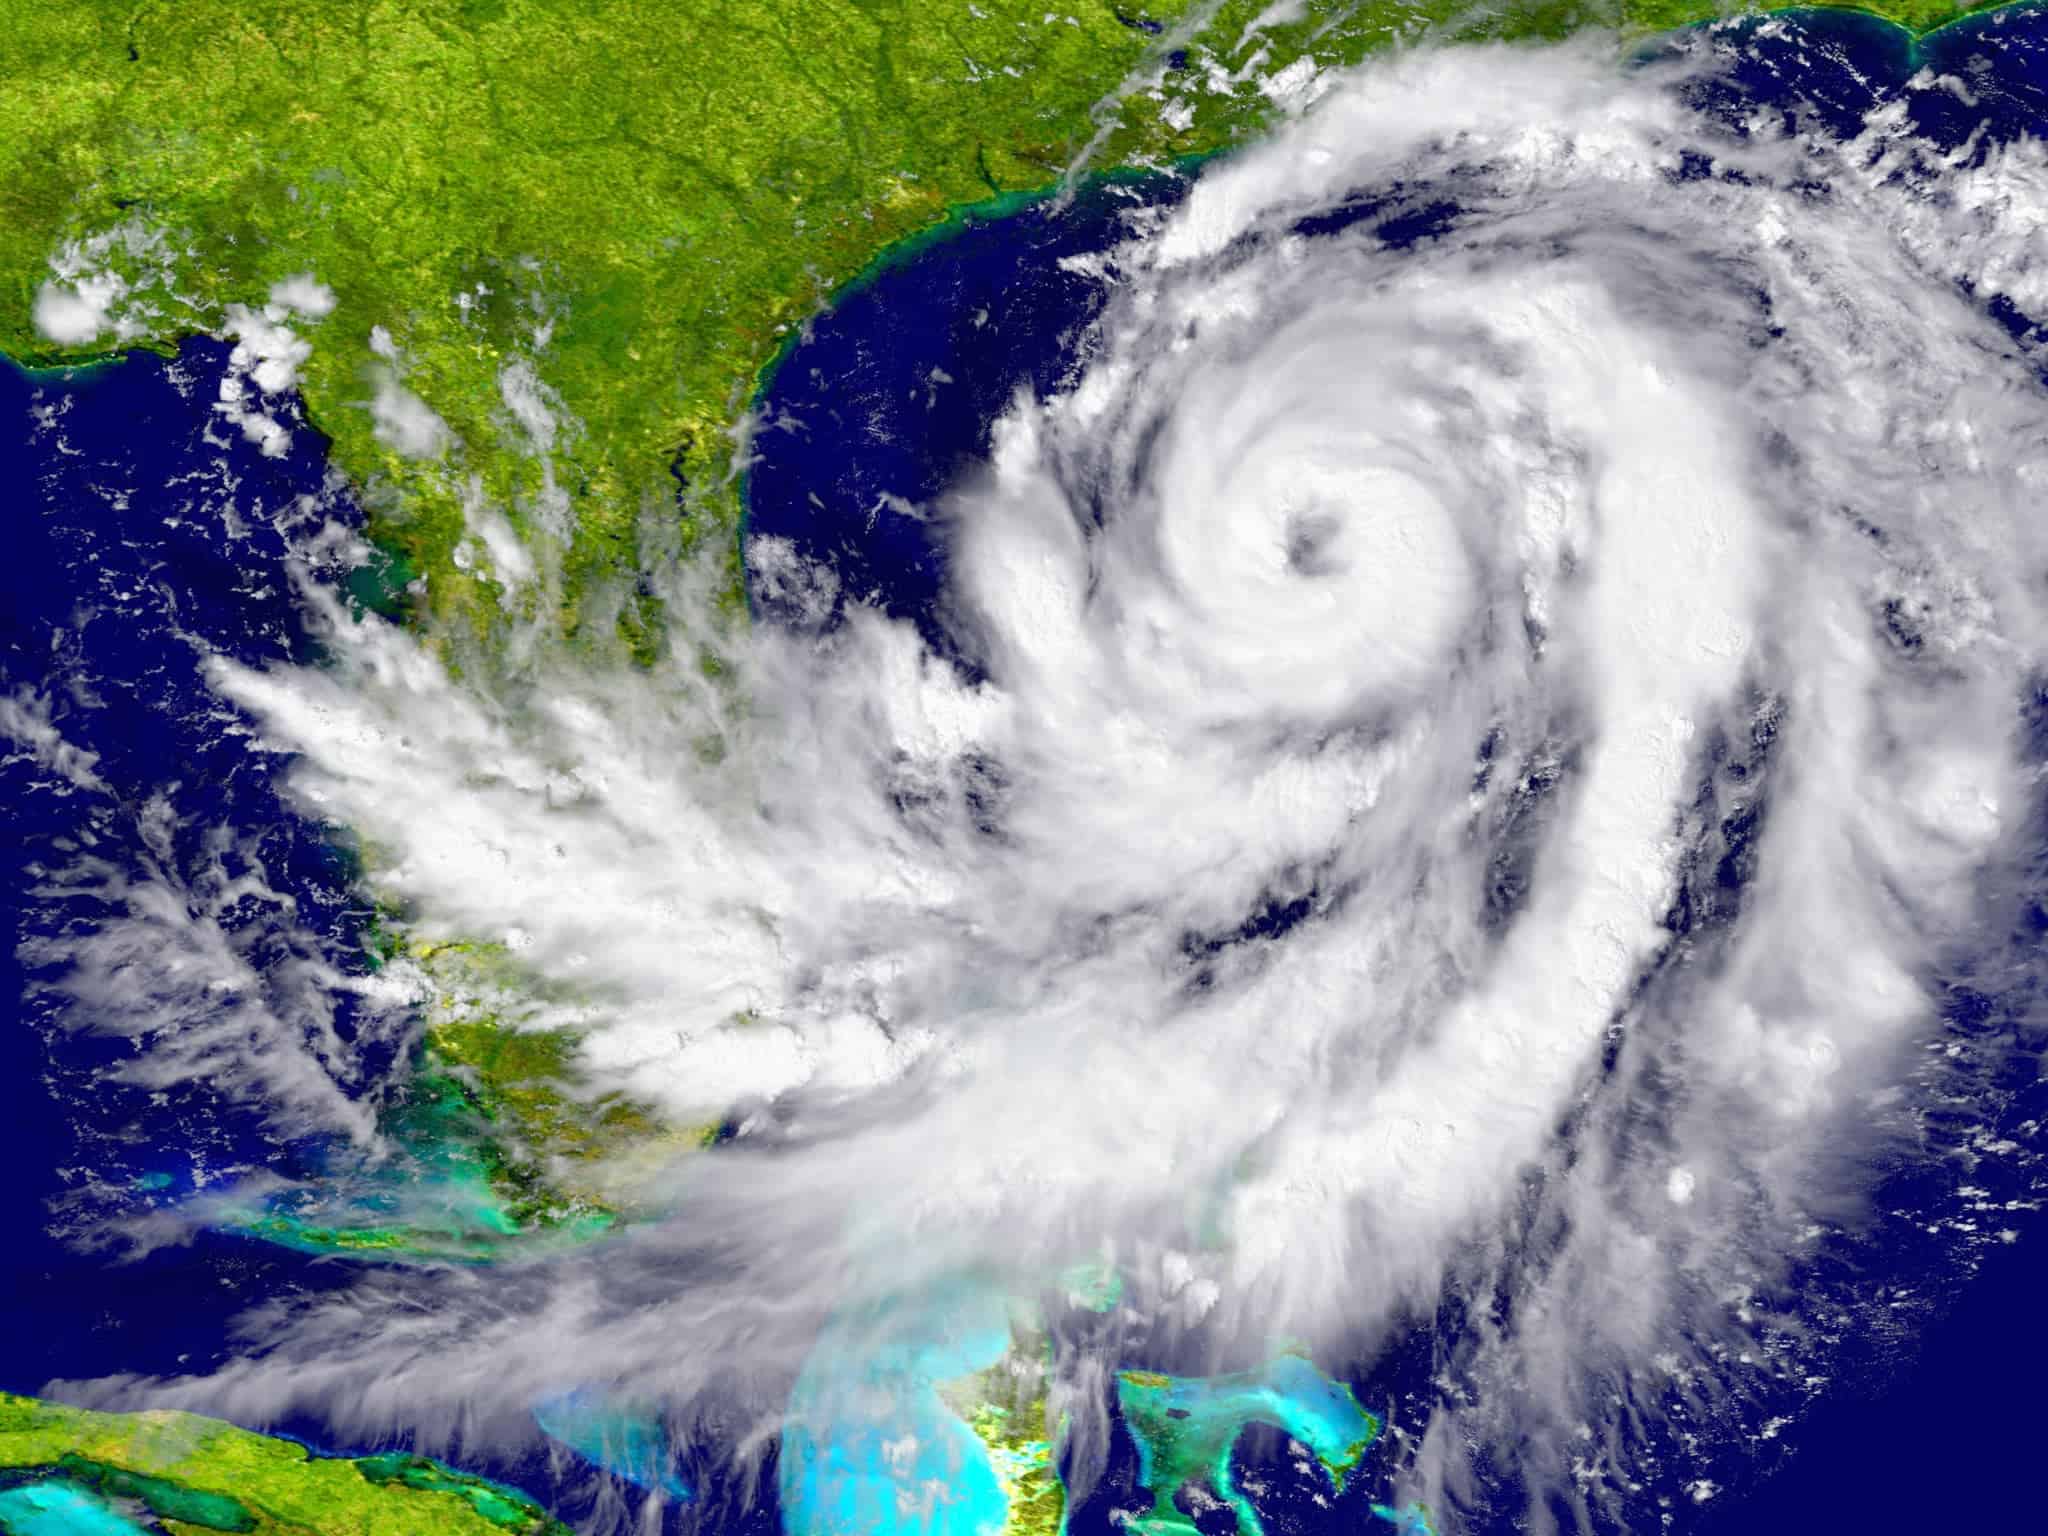 A satellite image of a hurricane in the gulf of mexico.